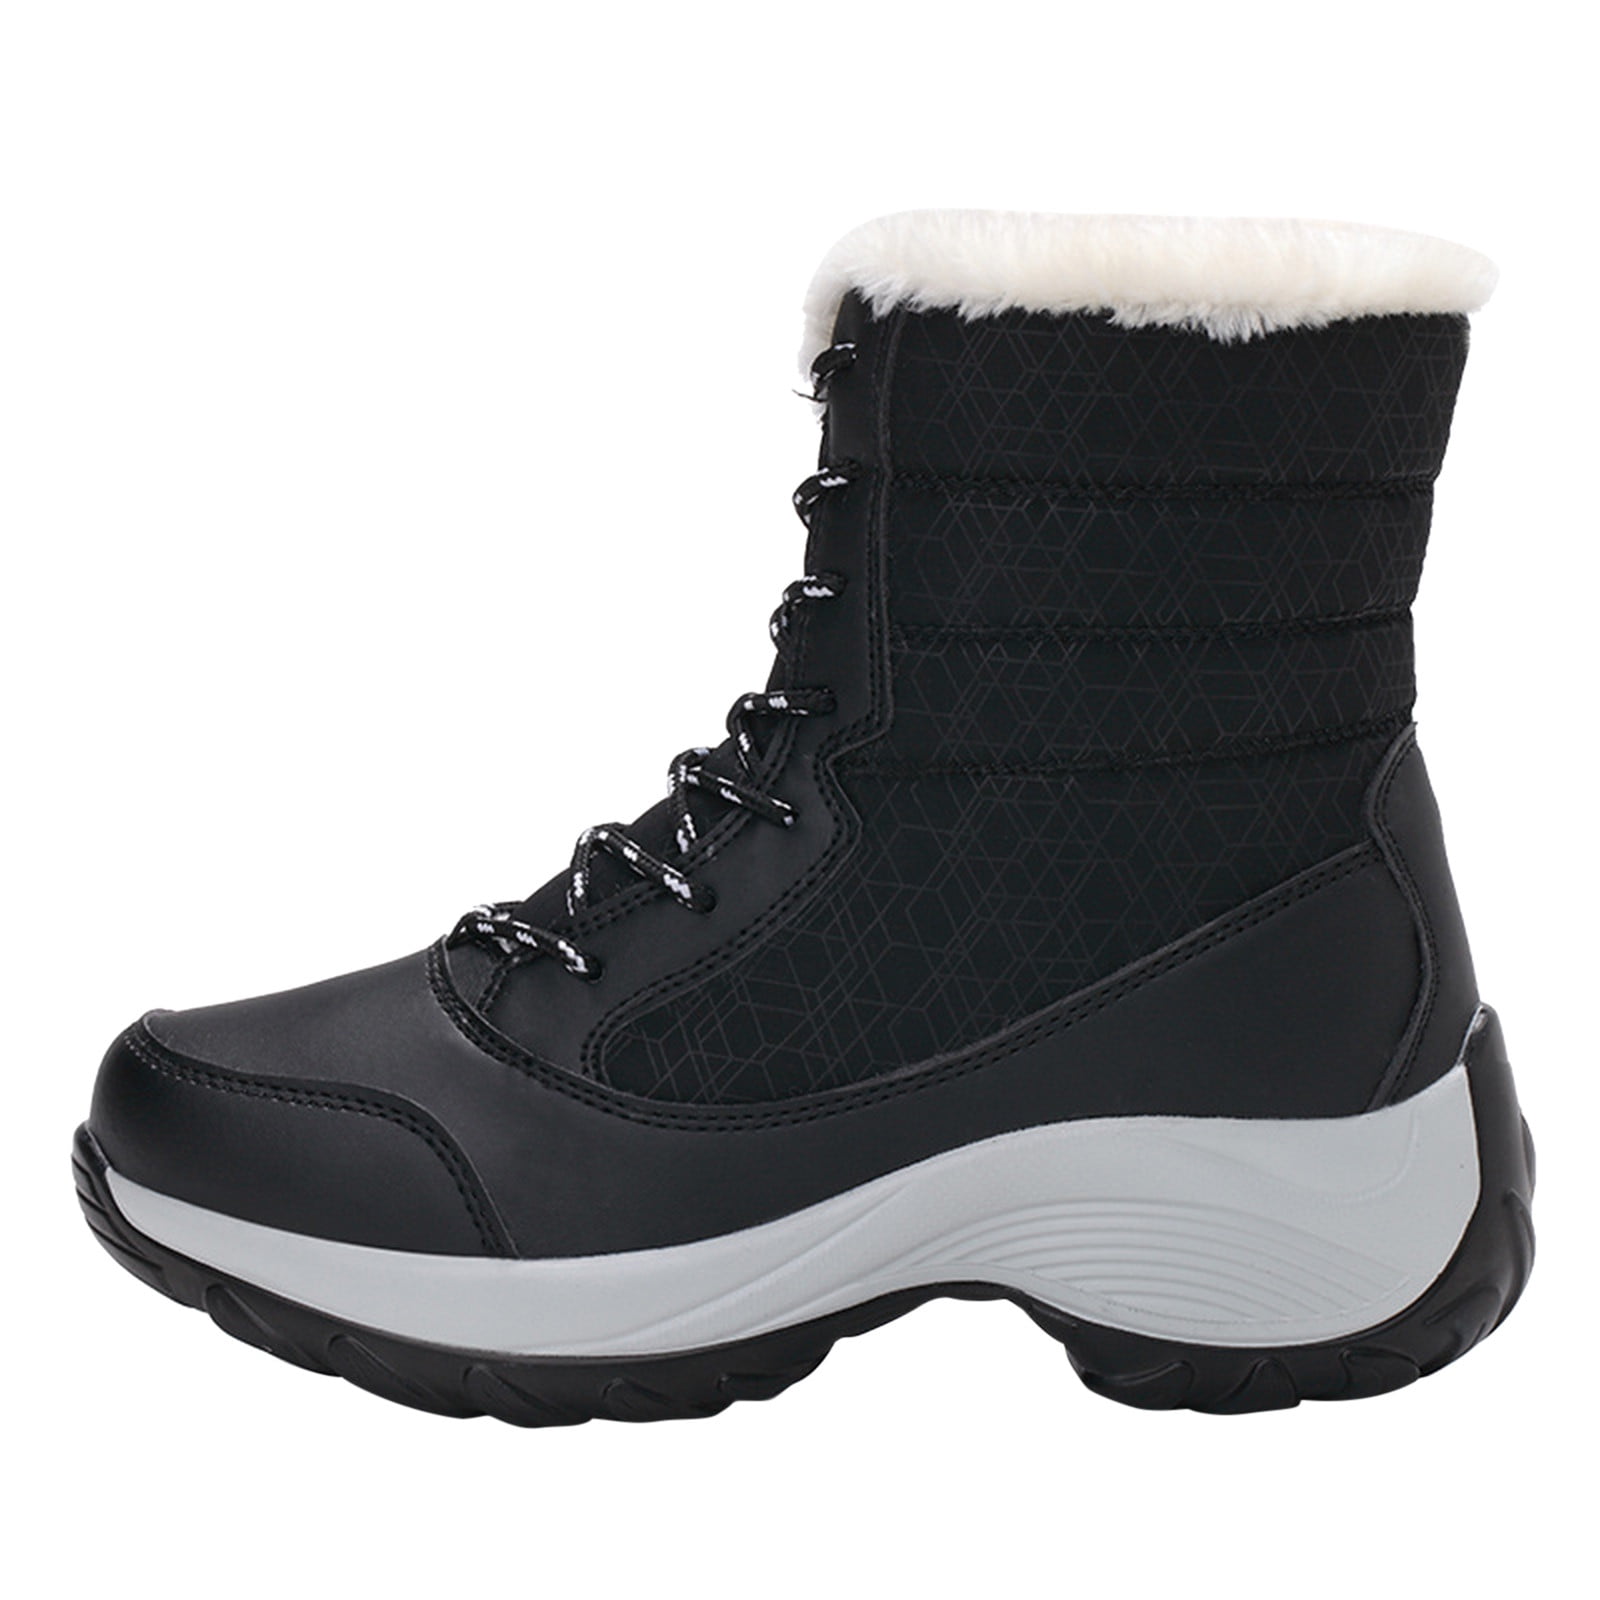 Puntoco Women'S Winter Boots Clearance,Eva Thick-Soled Women'S Shoes ...